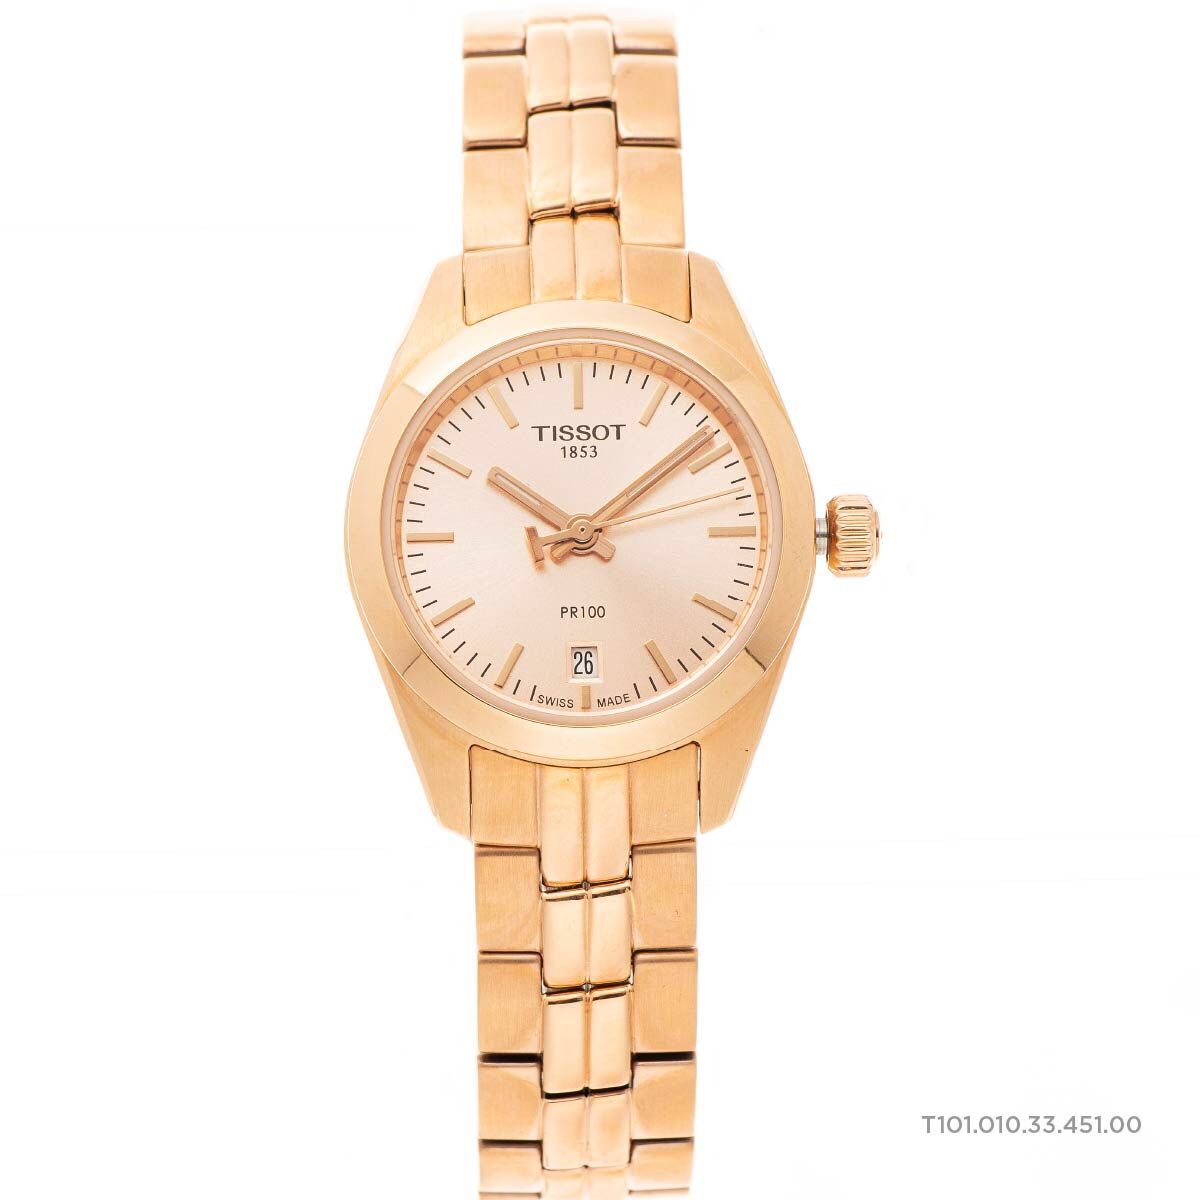 Tissot T-Classic Rose Gold PVD Dial Ladies Watch T1010103345100 T101.010.33.451.00